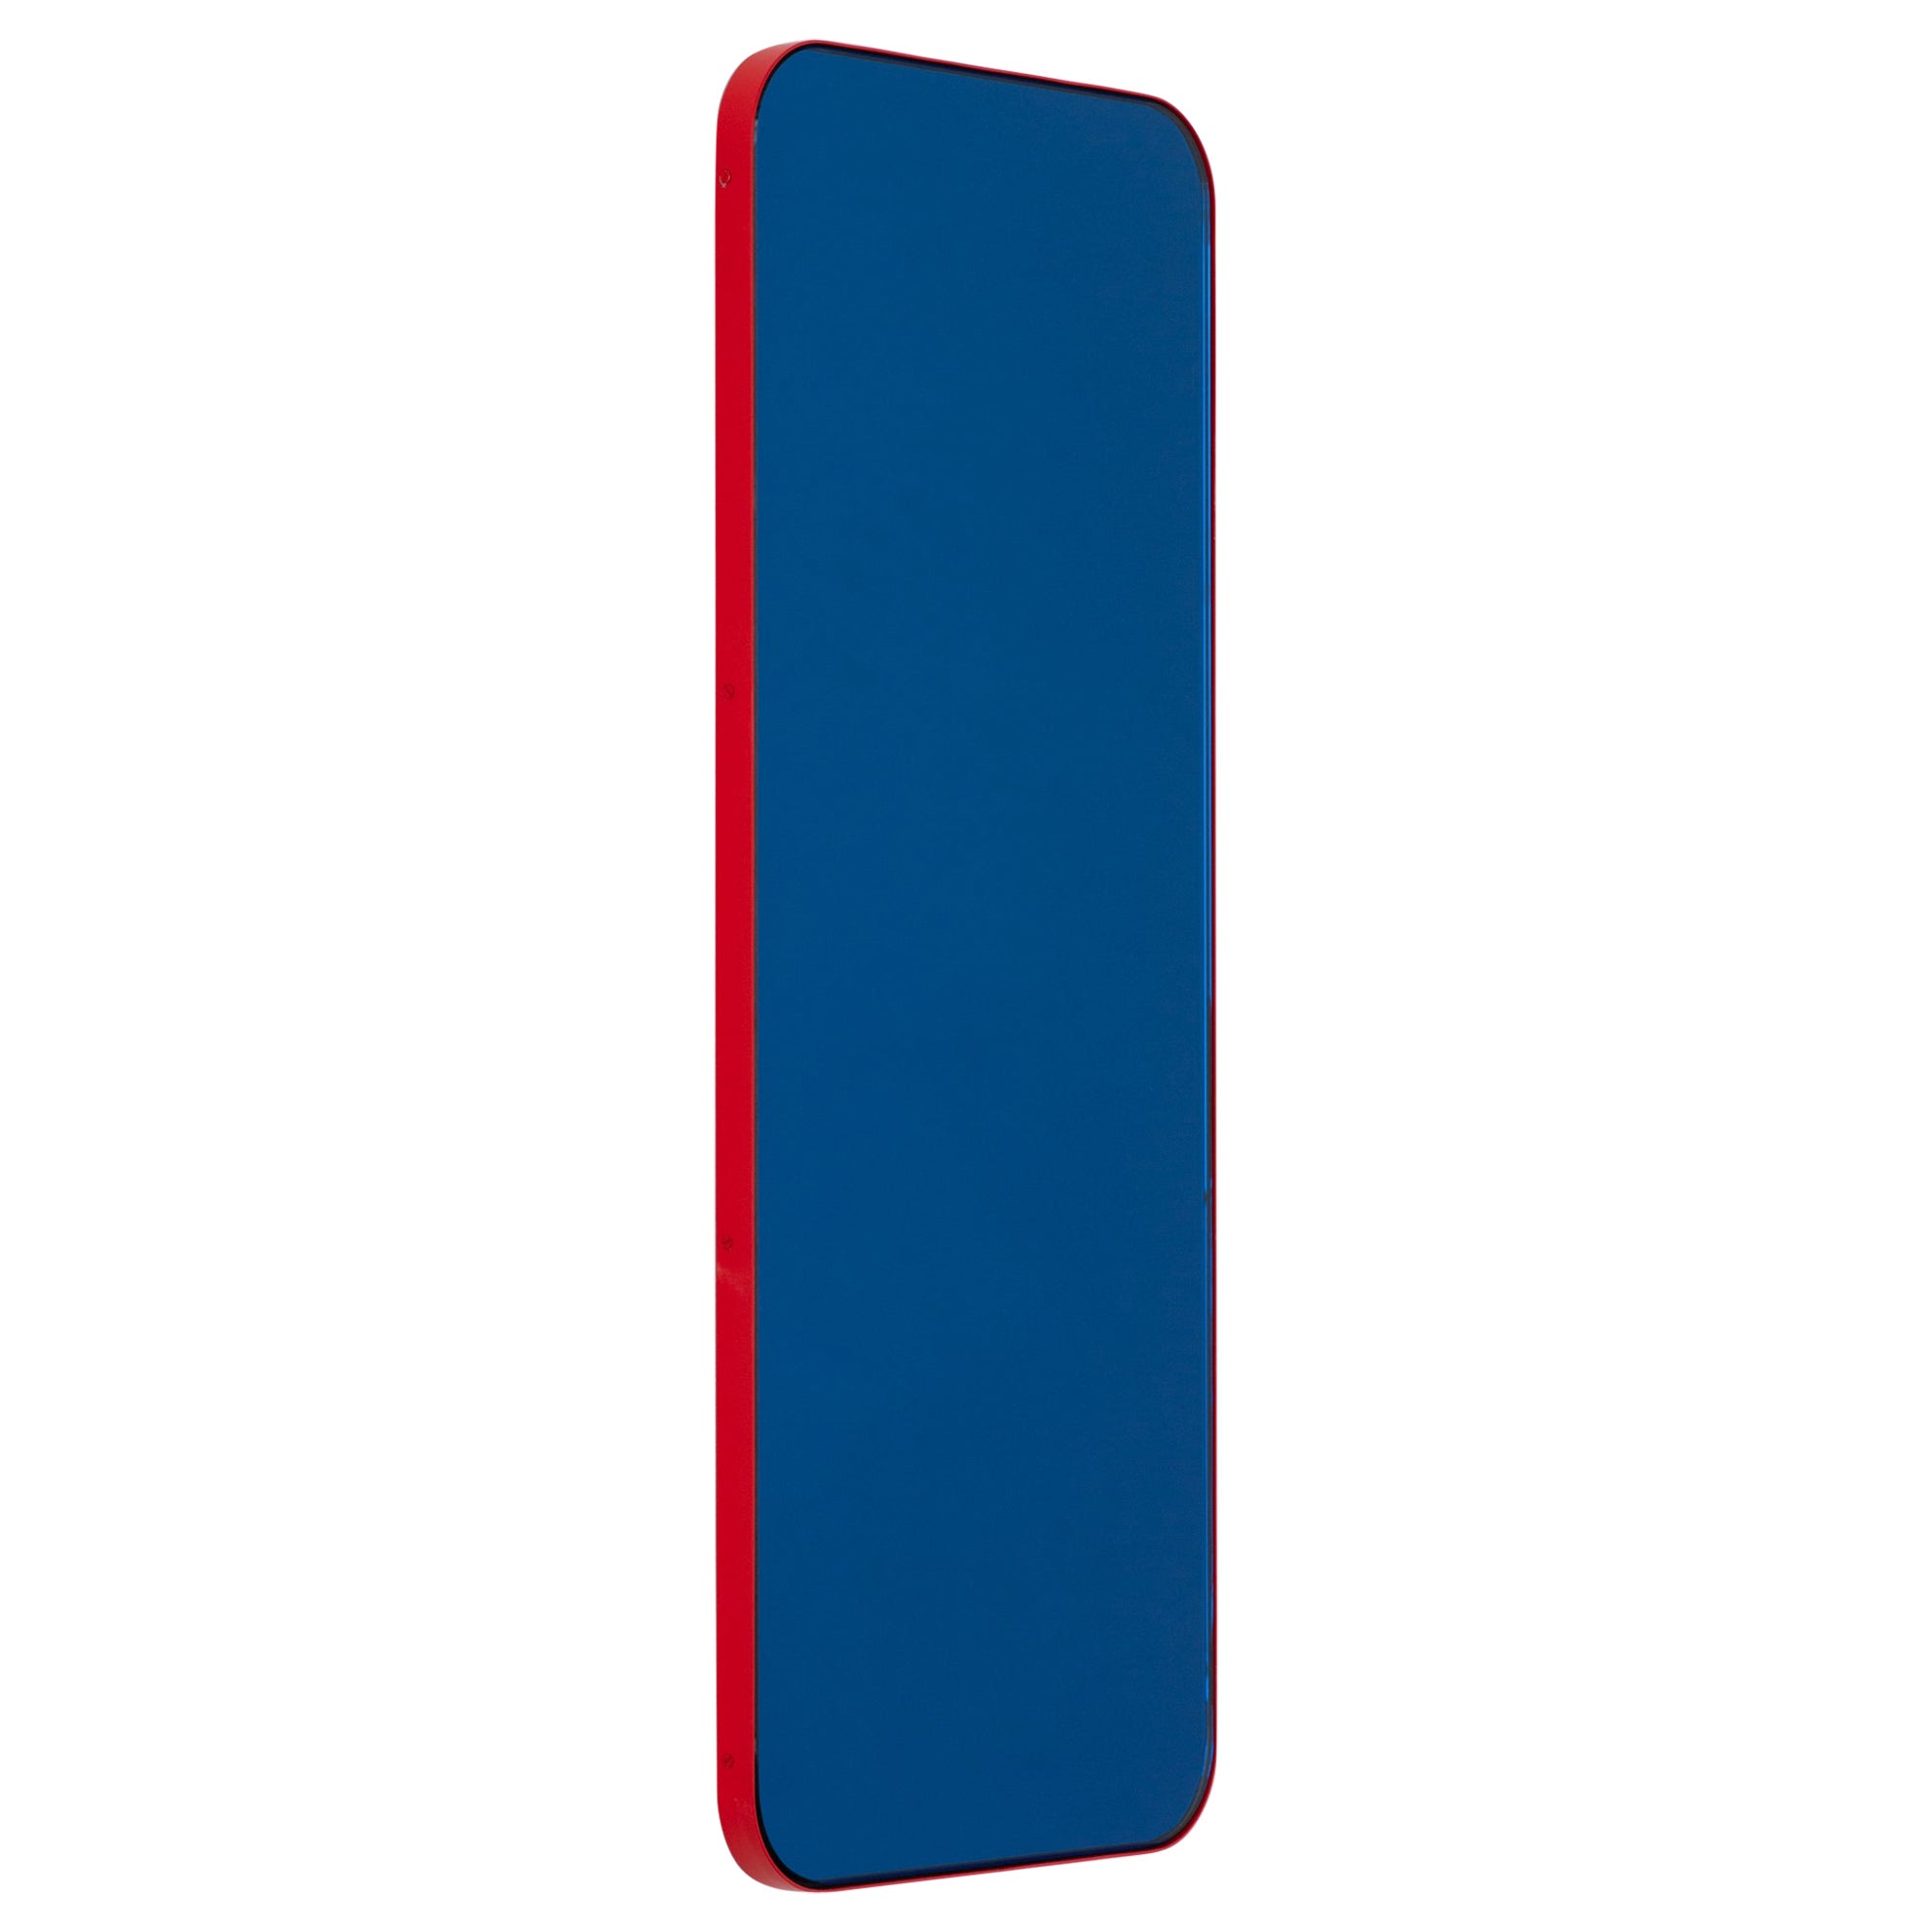 Quadris Rectangular Contemporary Blue Mirror with a Red Frame, Large